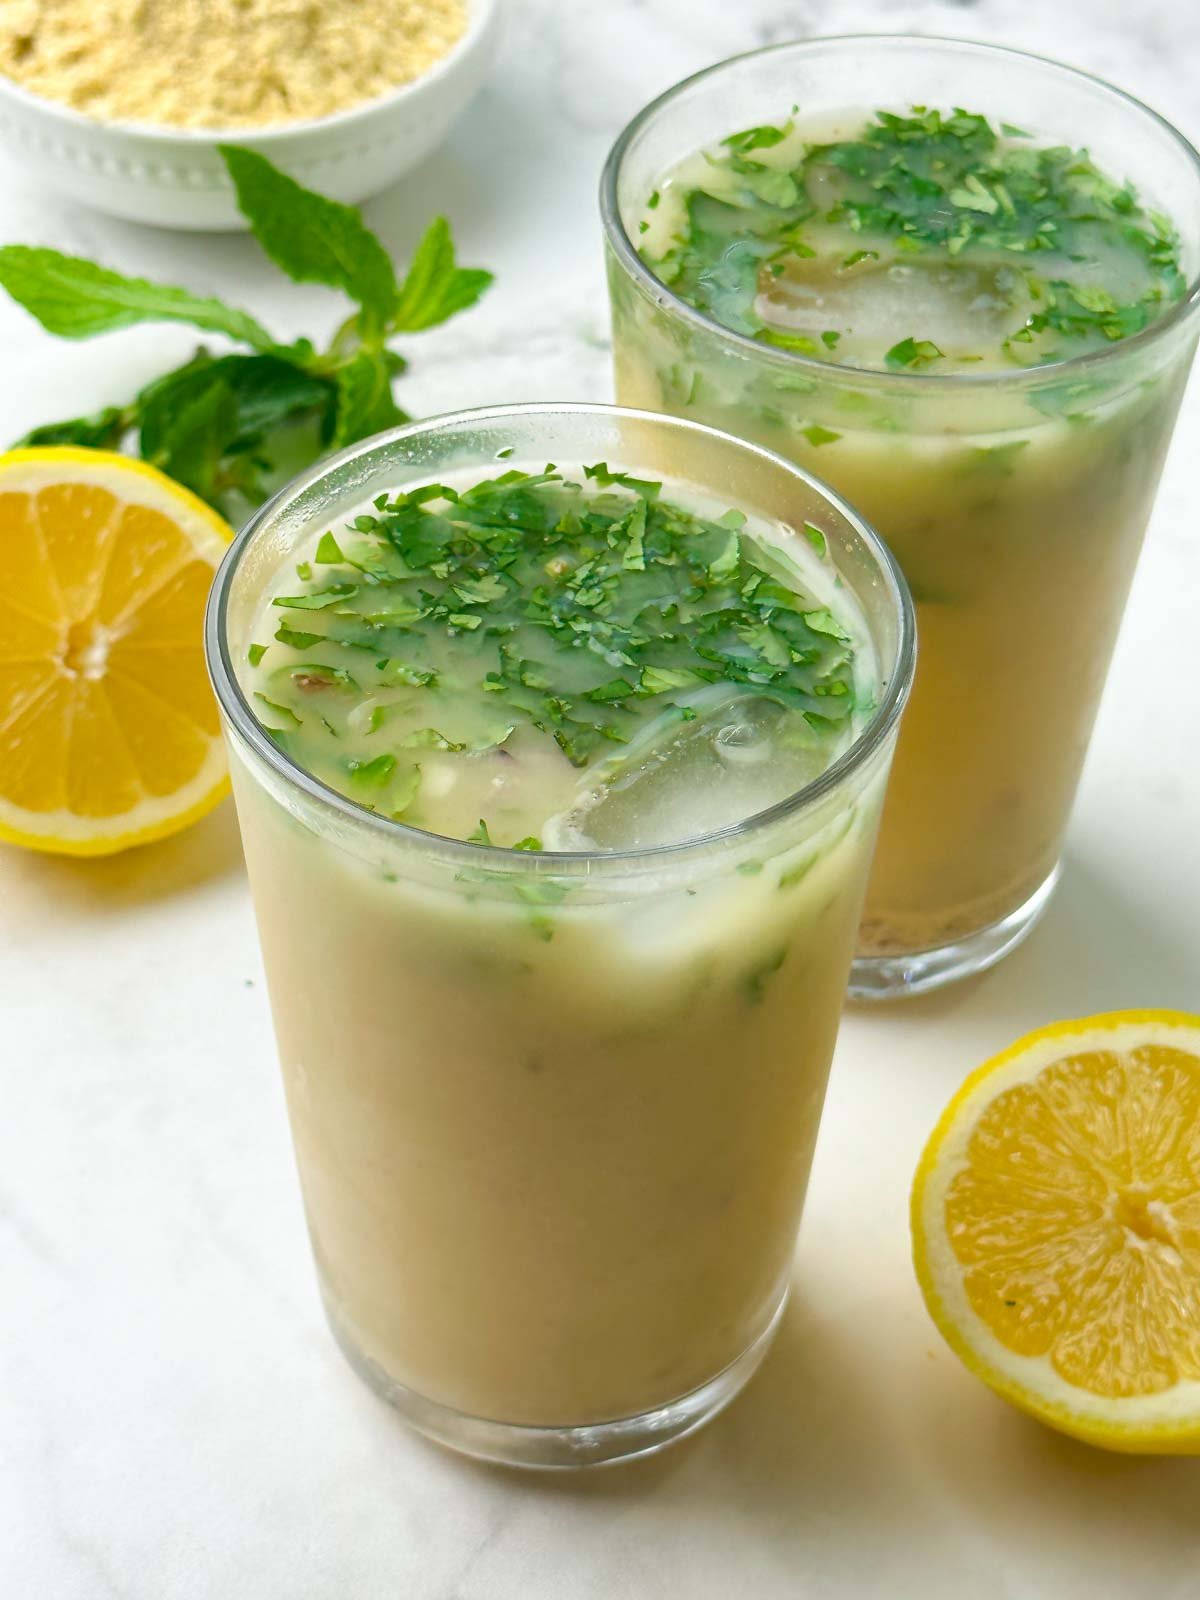 salted roasted chickpea flour beverage served in a tall glass garnished with mint and lemon on the side